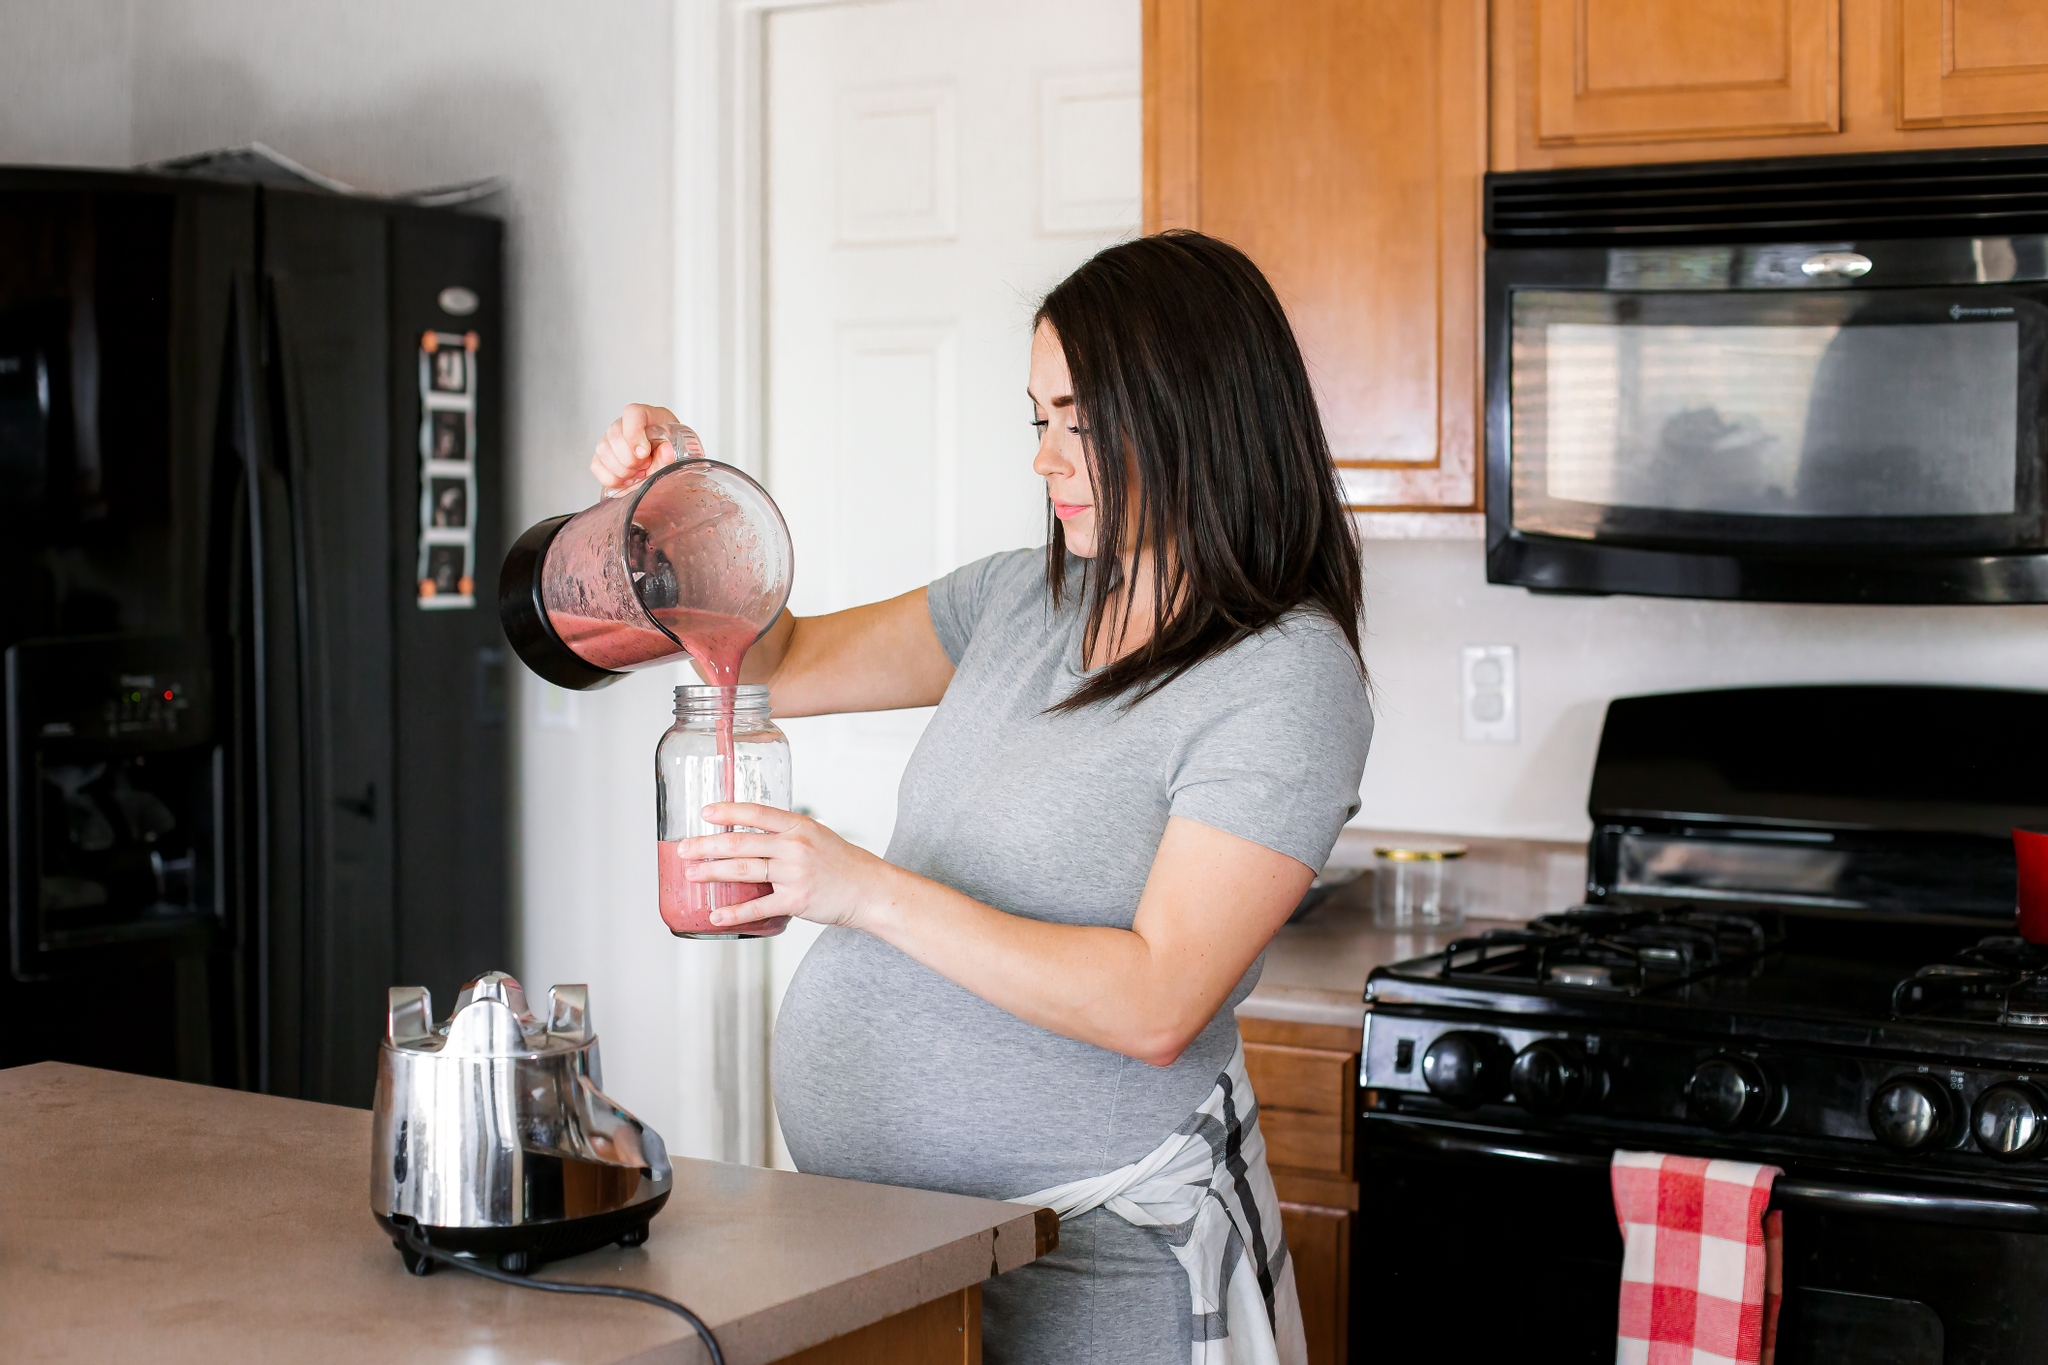 Foods to avoid when pregnant: Woman with pronounced baby bump is in kitchen pouring herself a beverage